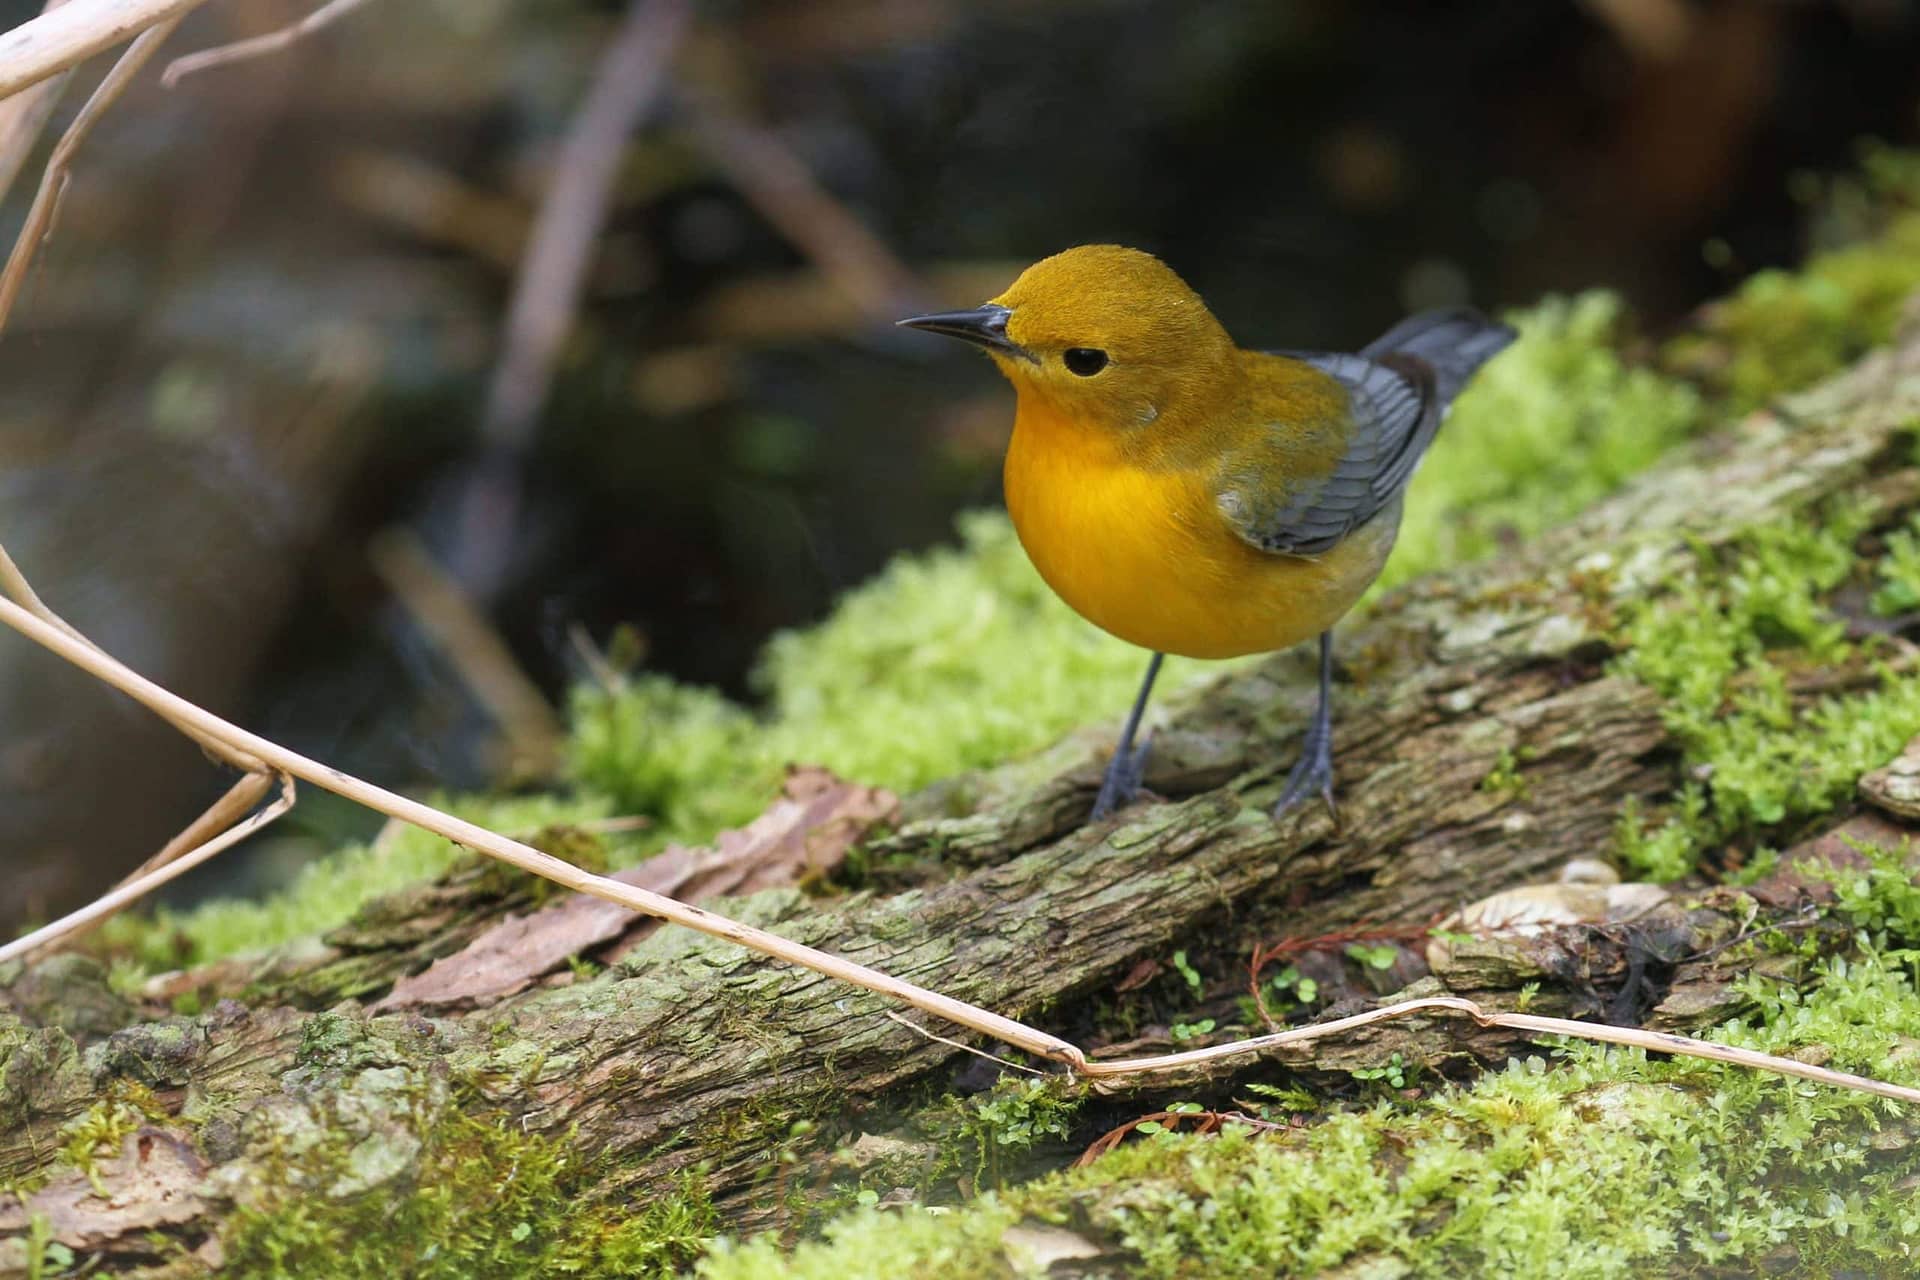 Prothonotary Warbler, photo by Alex Lamoreaux